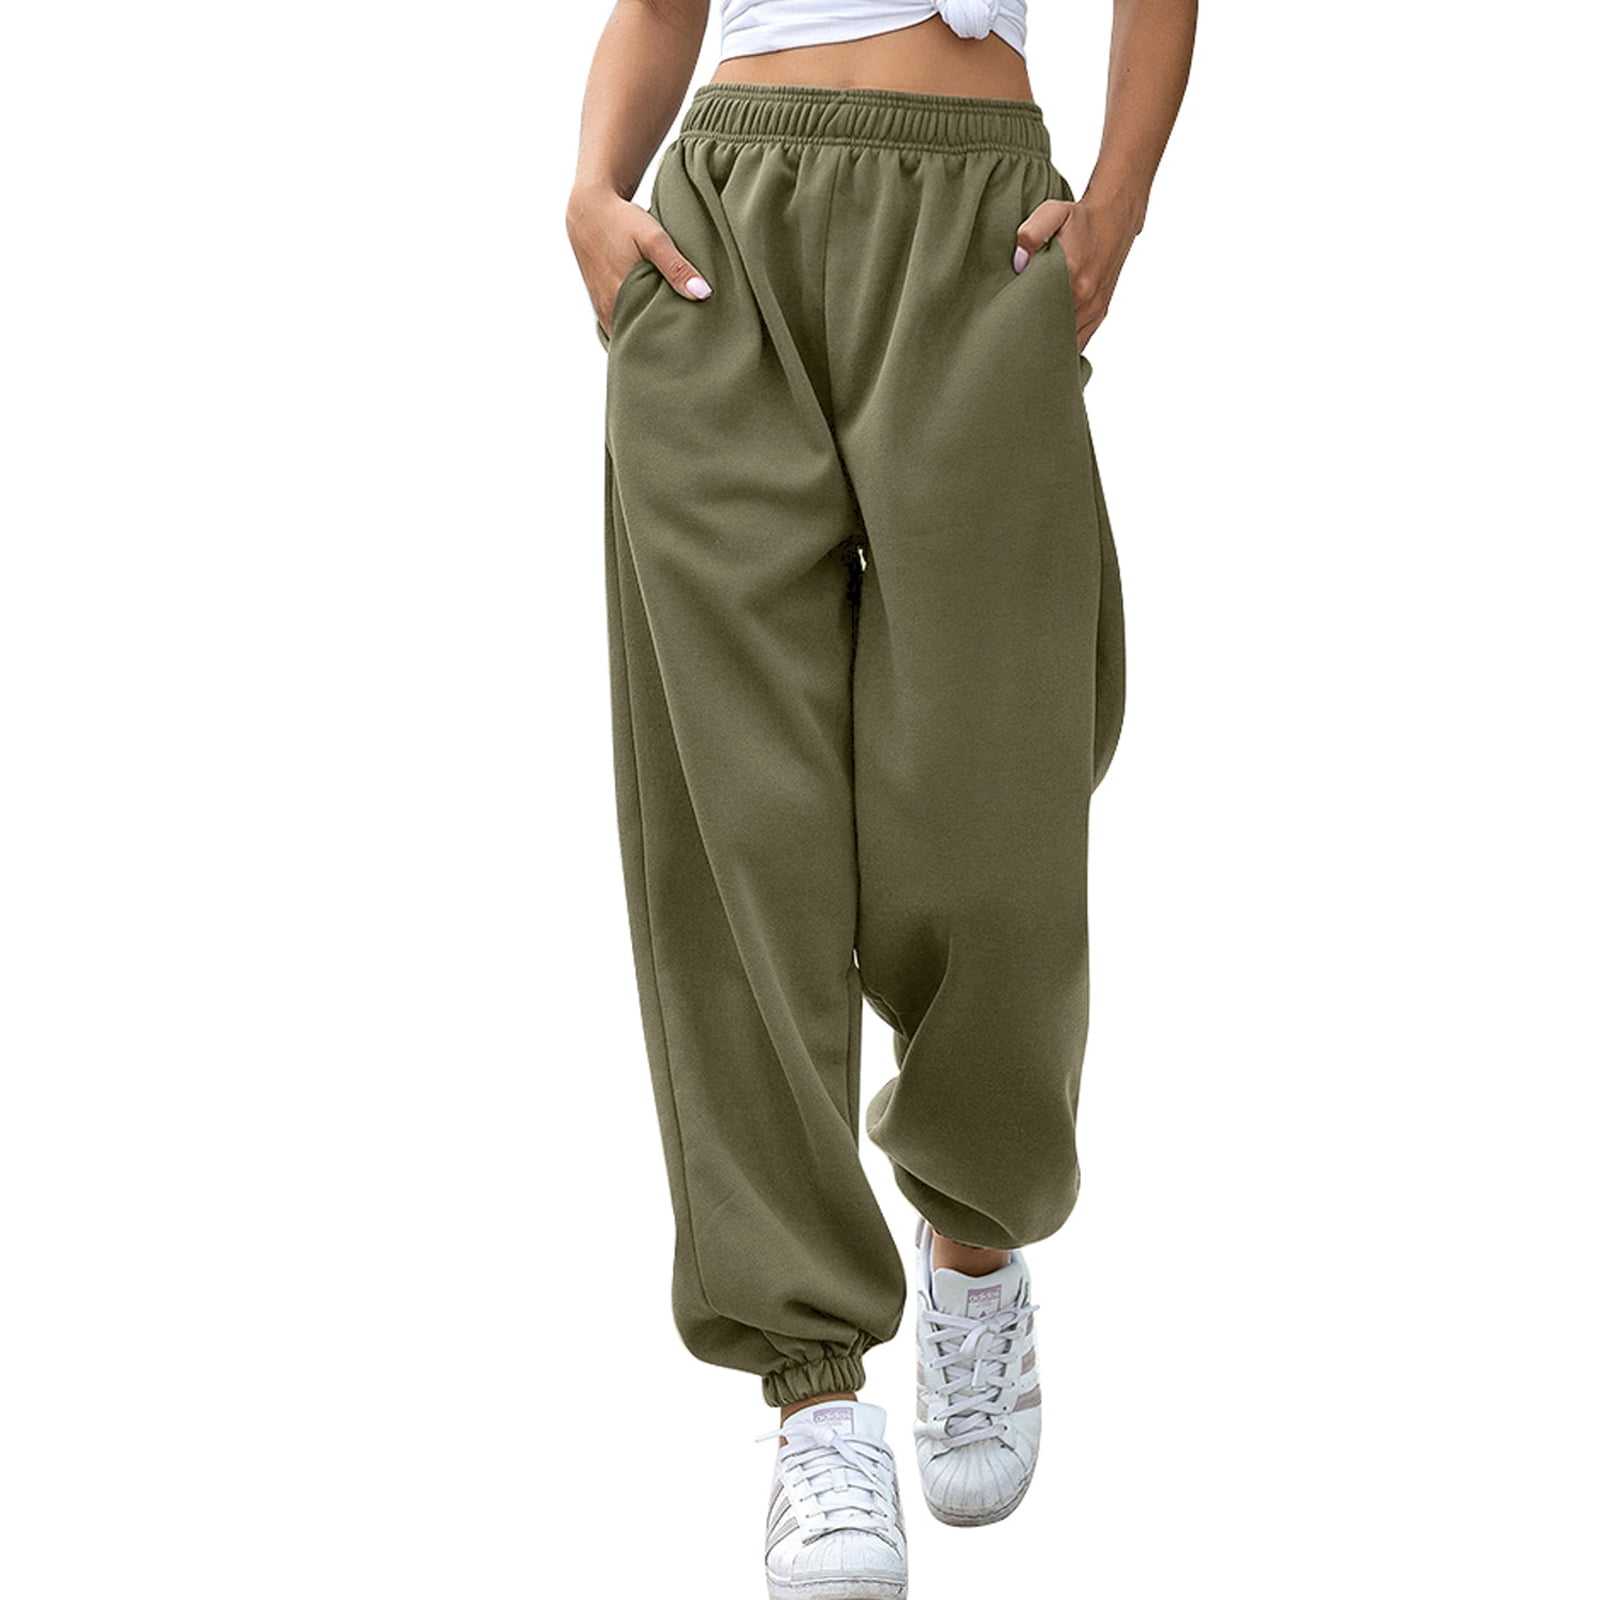 Winter Fleece Gym Sweatpants For Women Solid, Thick, Warm Workout Pink  Trousers Womens For Fall And Winter Ideal For Female Sport And Jogging  Mujer 201228 From Kong01, $11.48